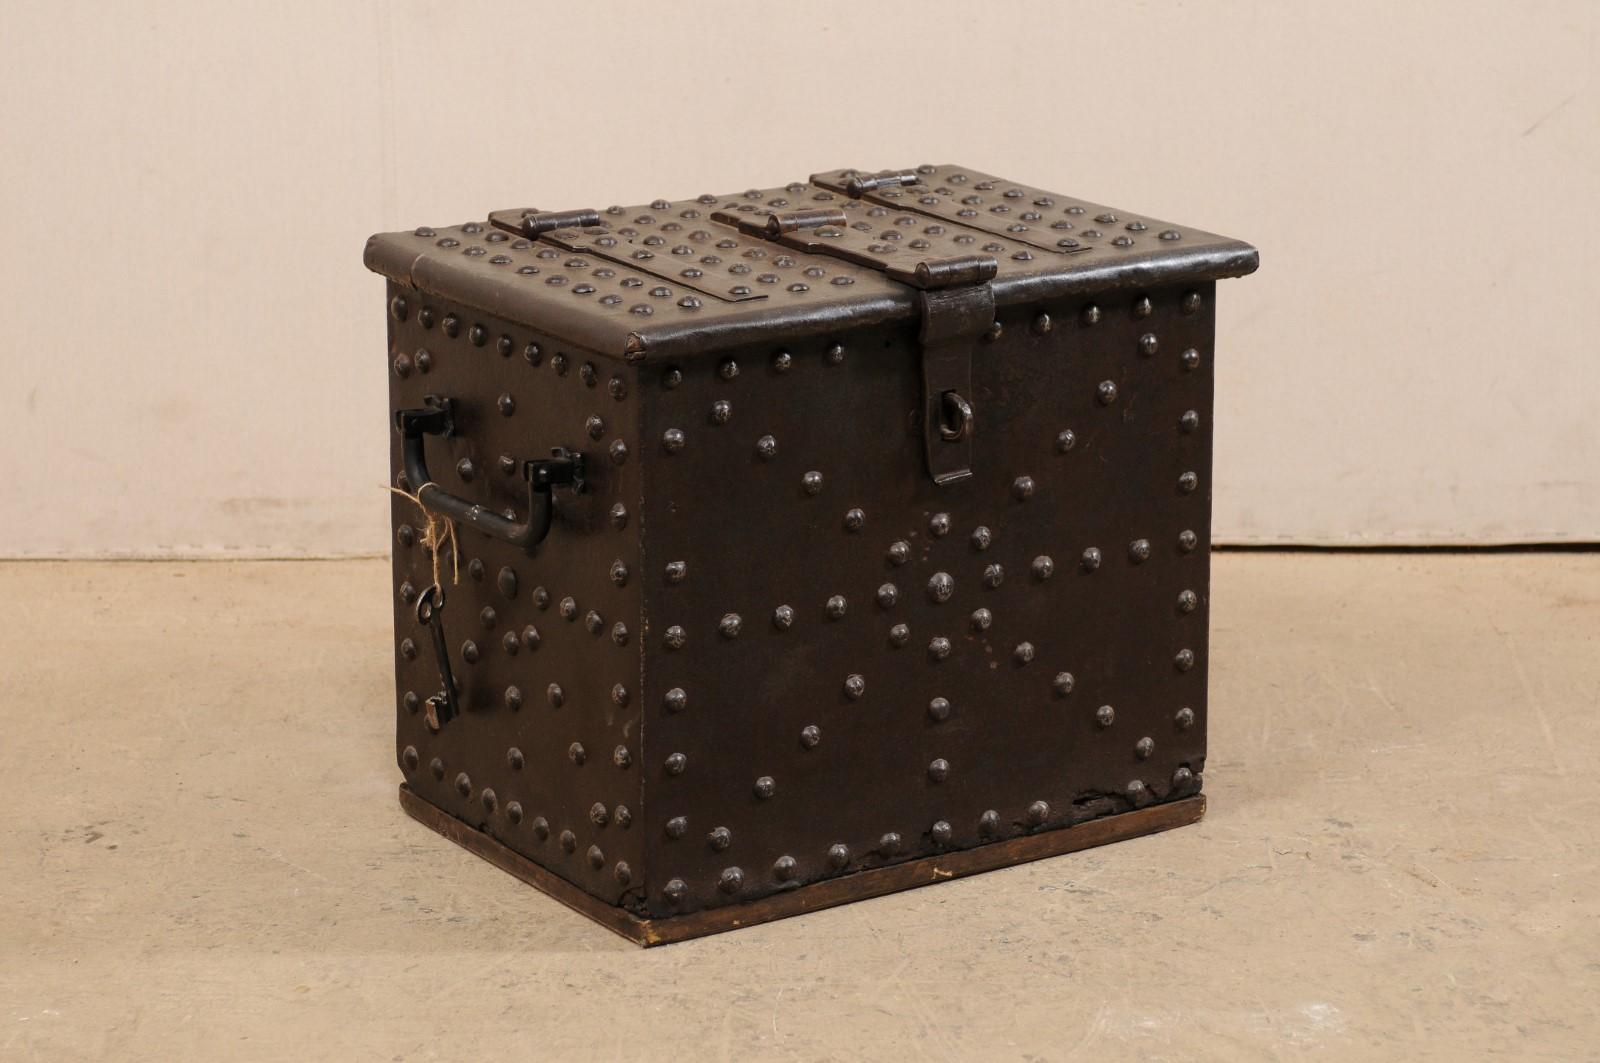 A Spanish strong box from the 18th century. This antique safe from is constructed or iron clad wood, and is handsomely adorn in domed iron nailhead trim throughout it's top, front, and handled sides. This piece retains it's original key and is in